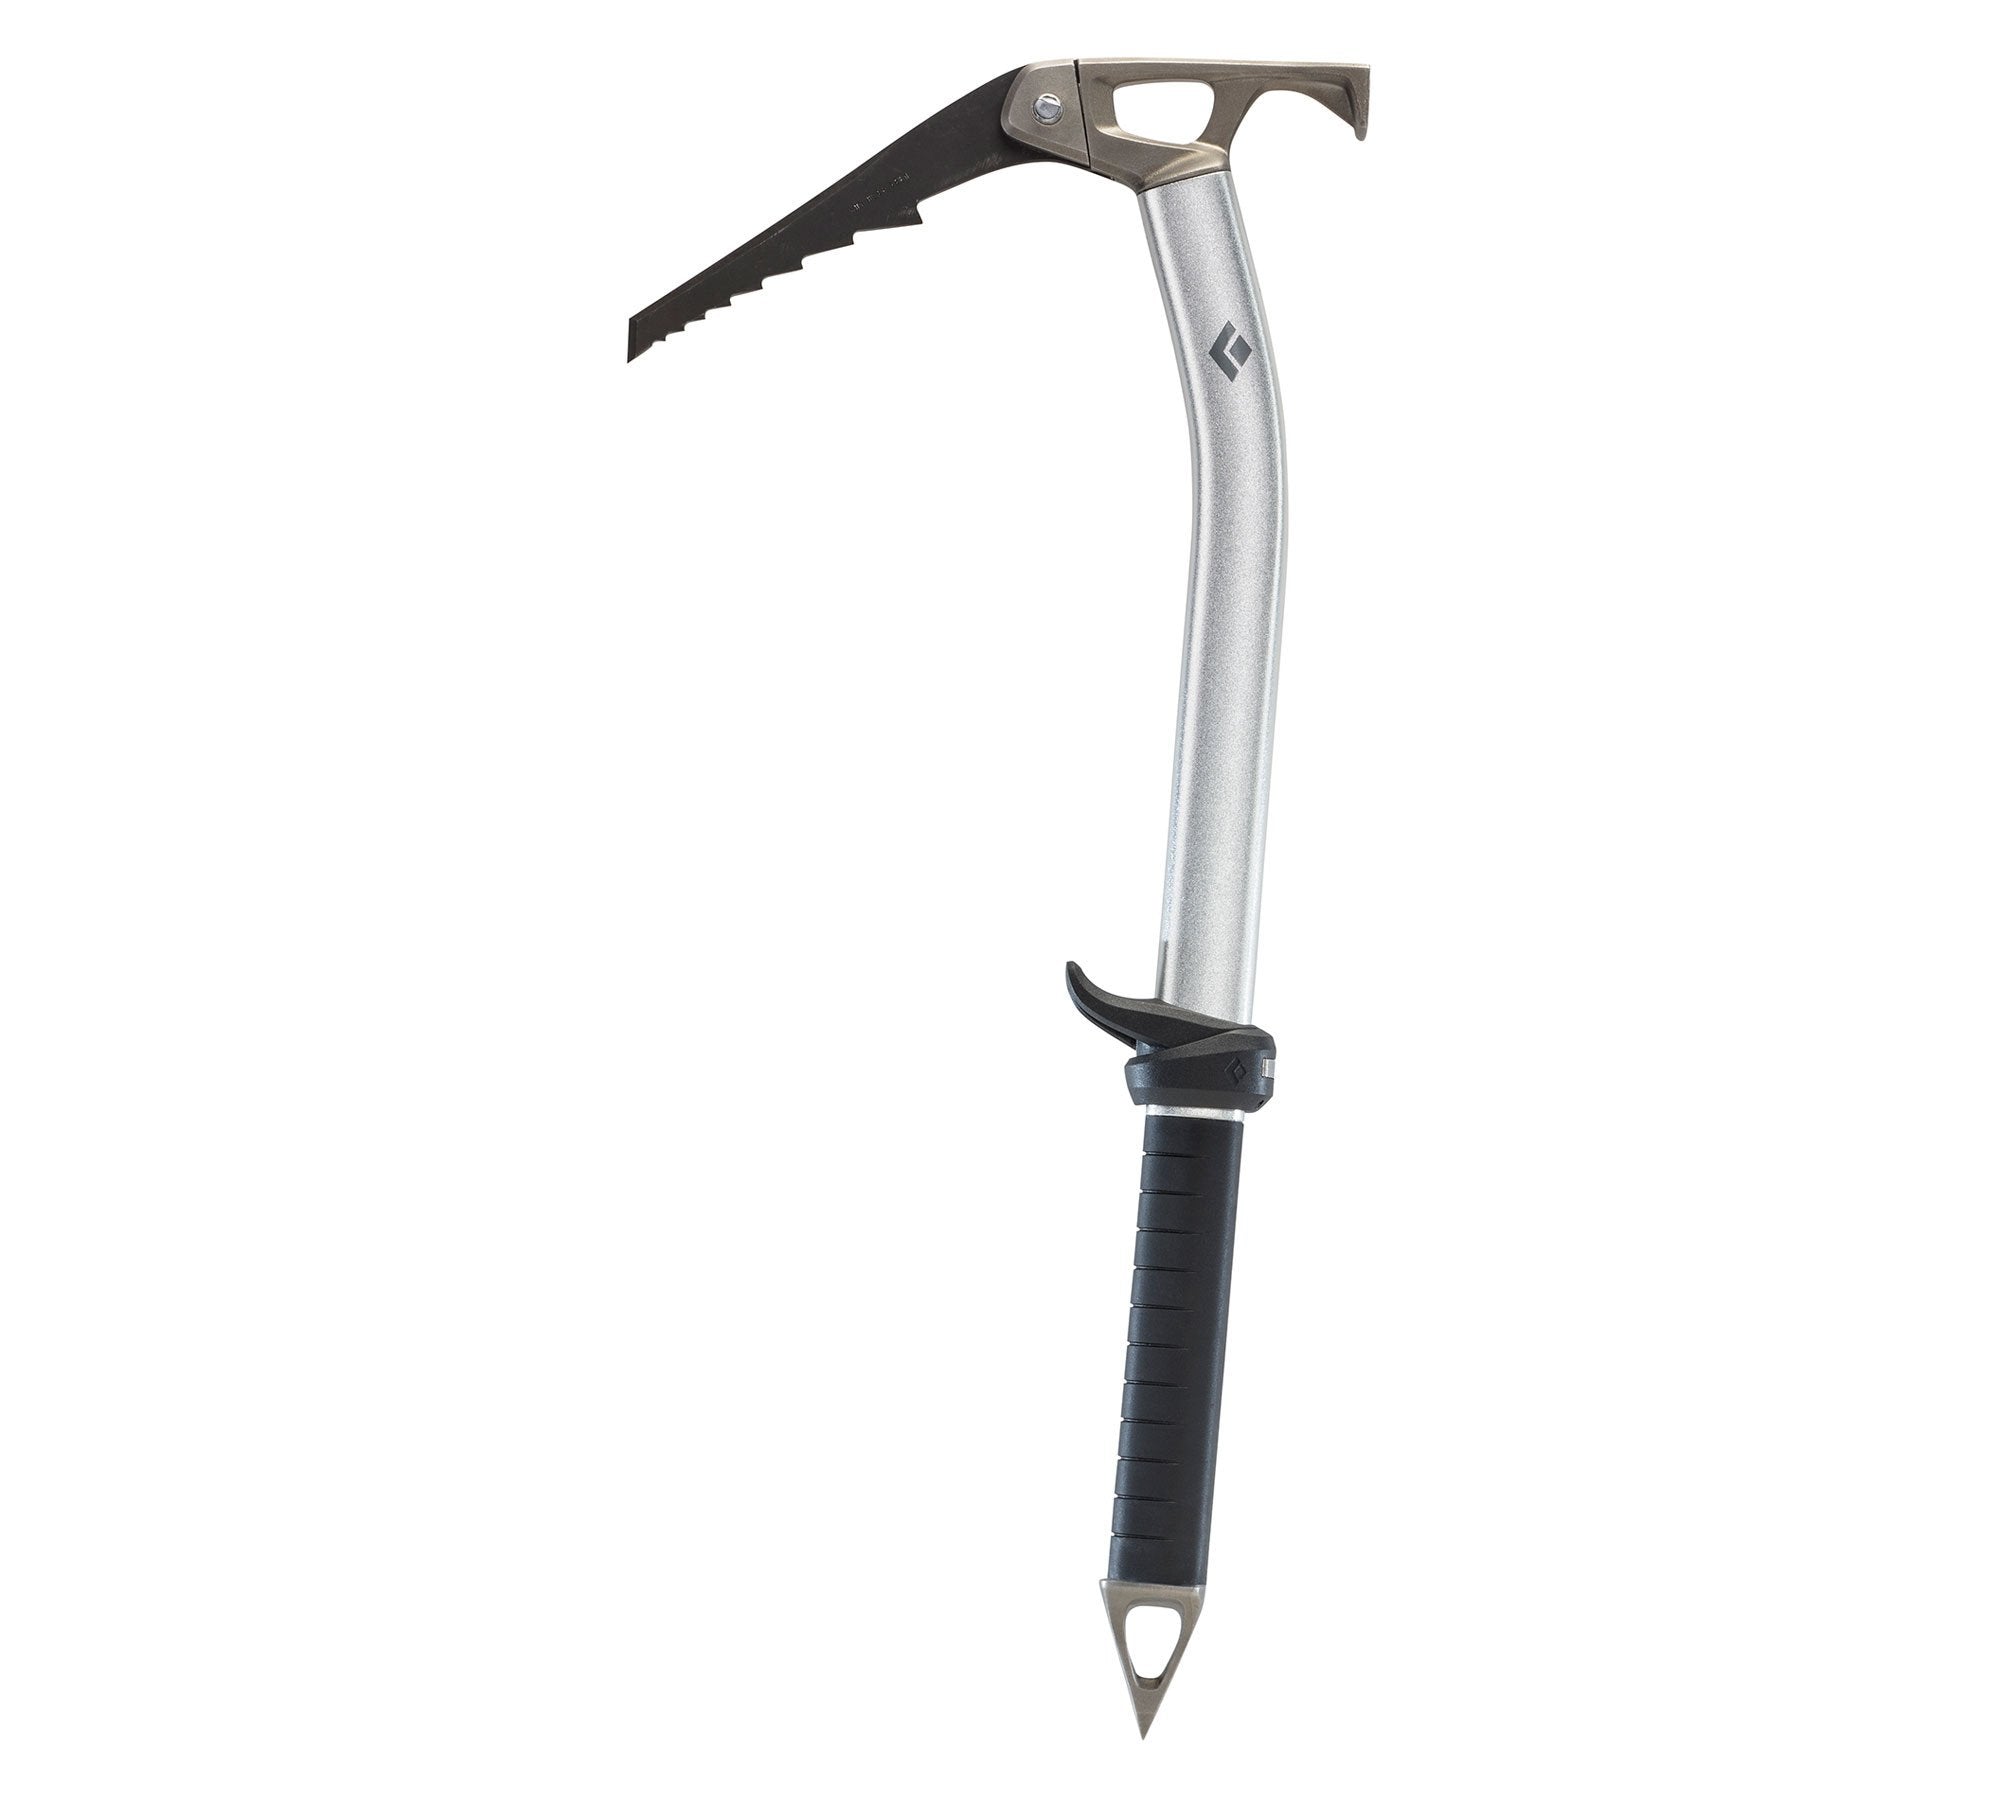 Black Diamond Venom Ice Tool, side view showing with black handle and silver shaft